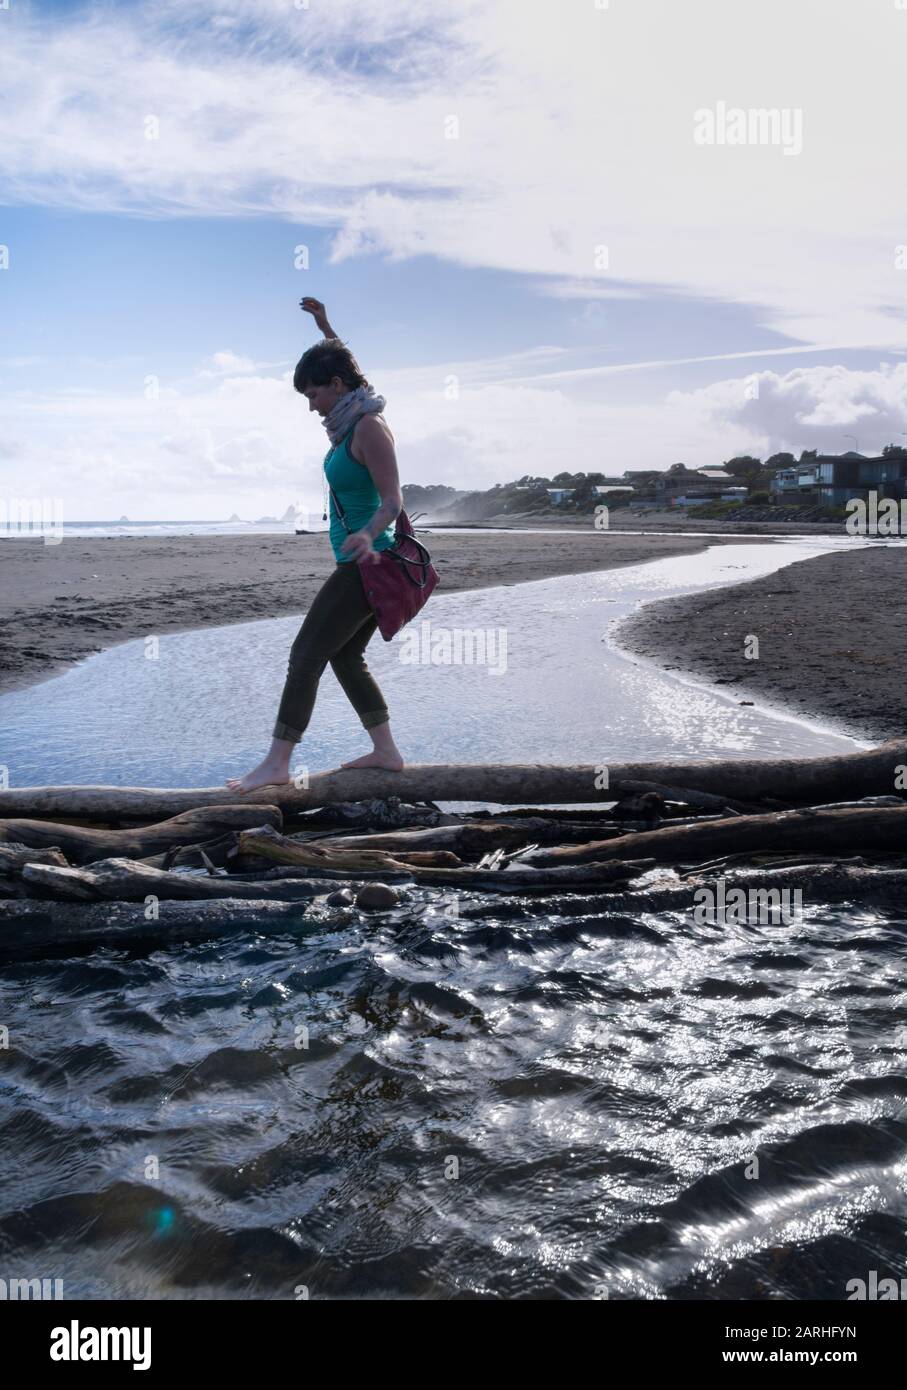 A woman crosses a stream by balancing on a large driftwood log, at Oakura Beach, New Zealand Stock Photo